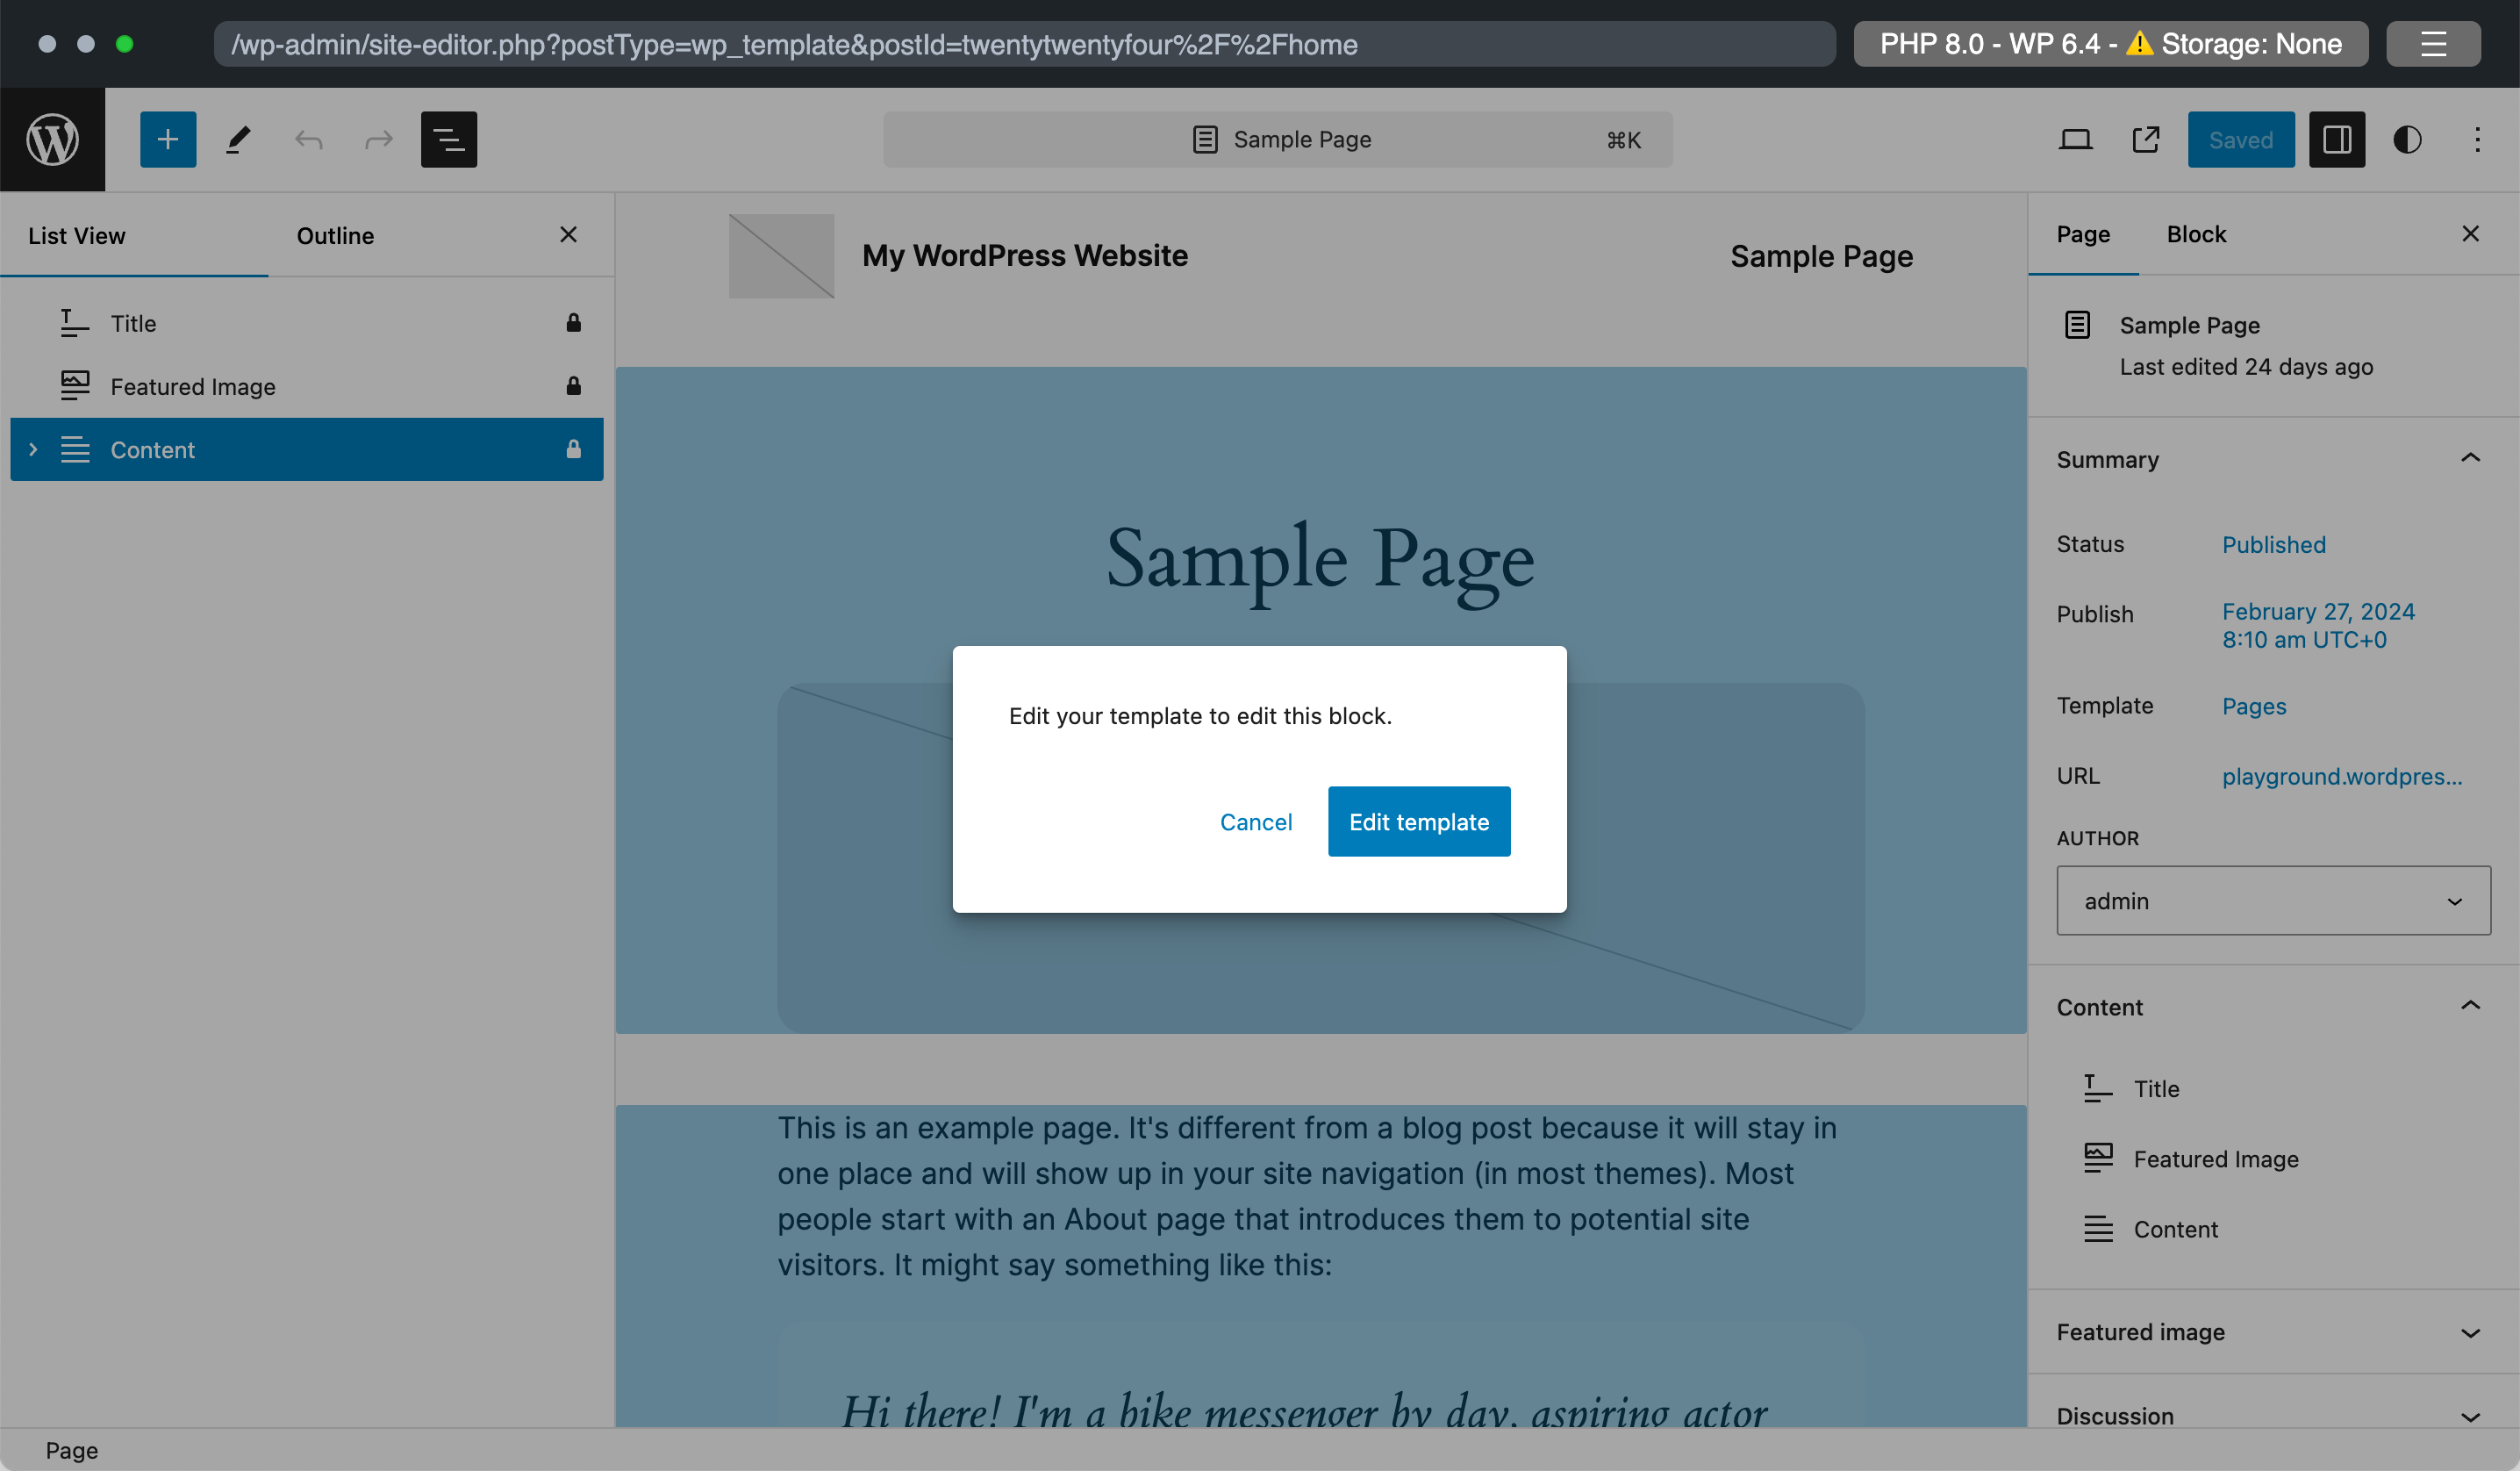 Screenshot of the page editing experience inside of the site editor.